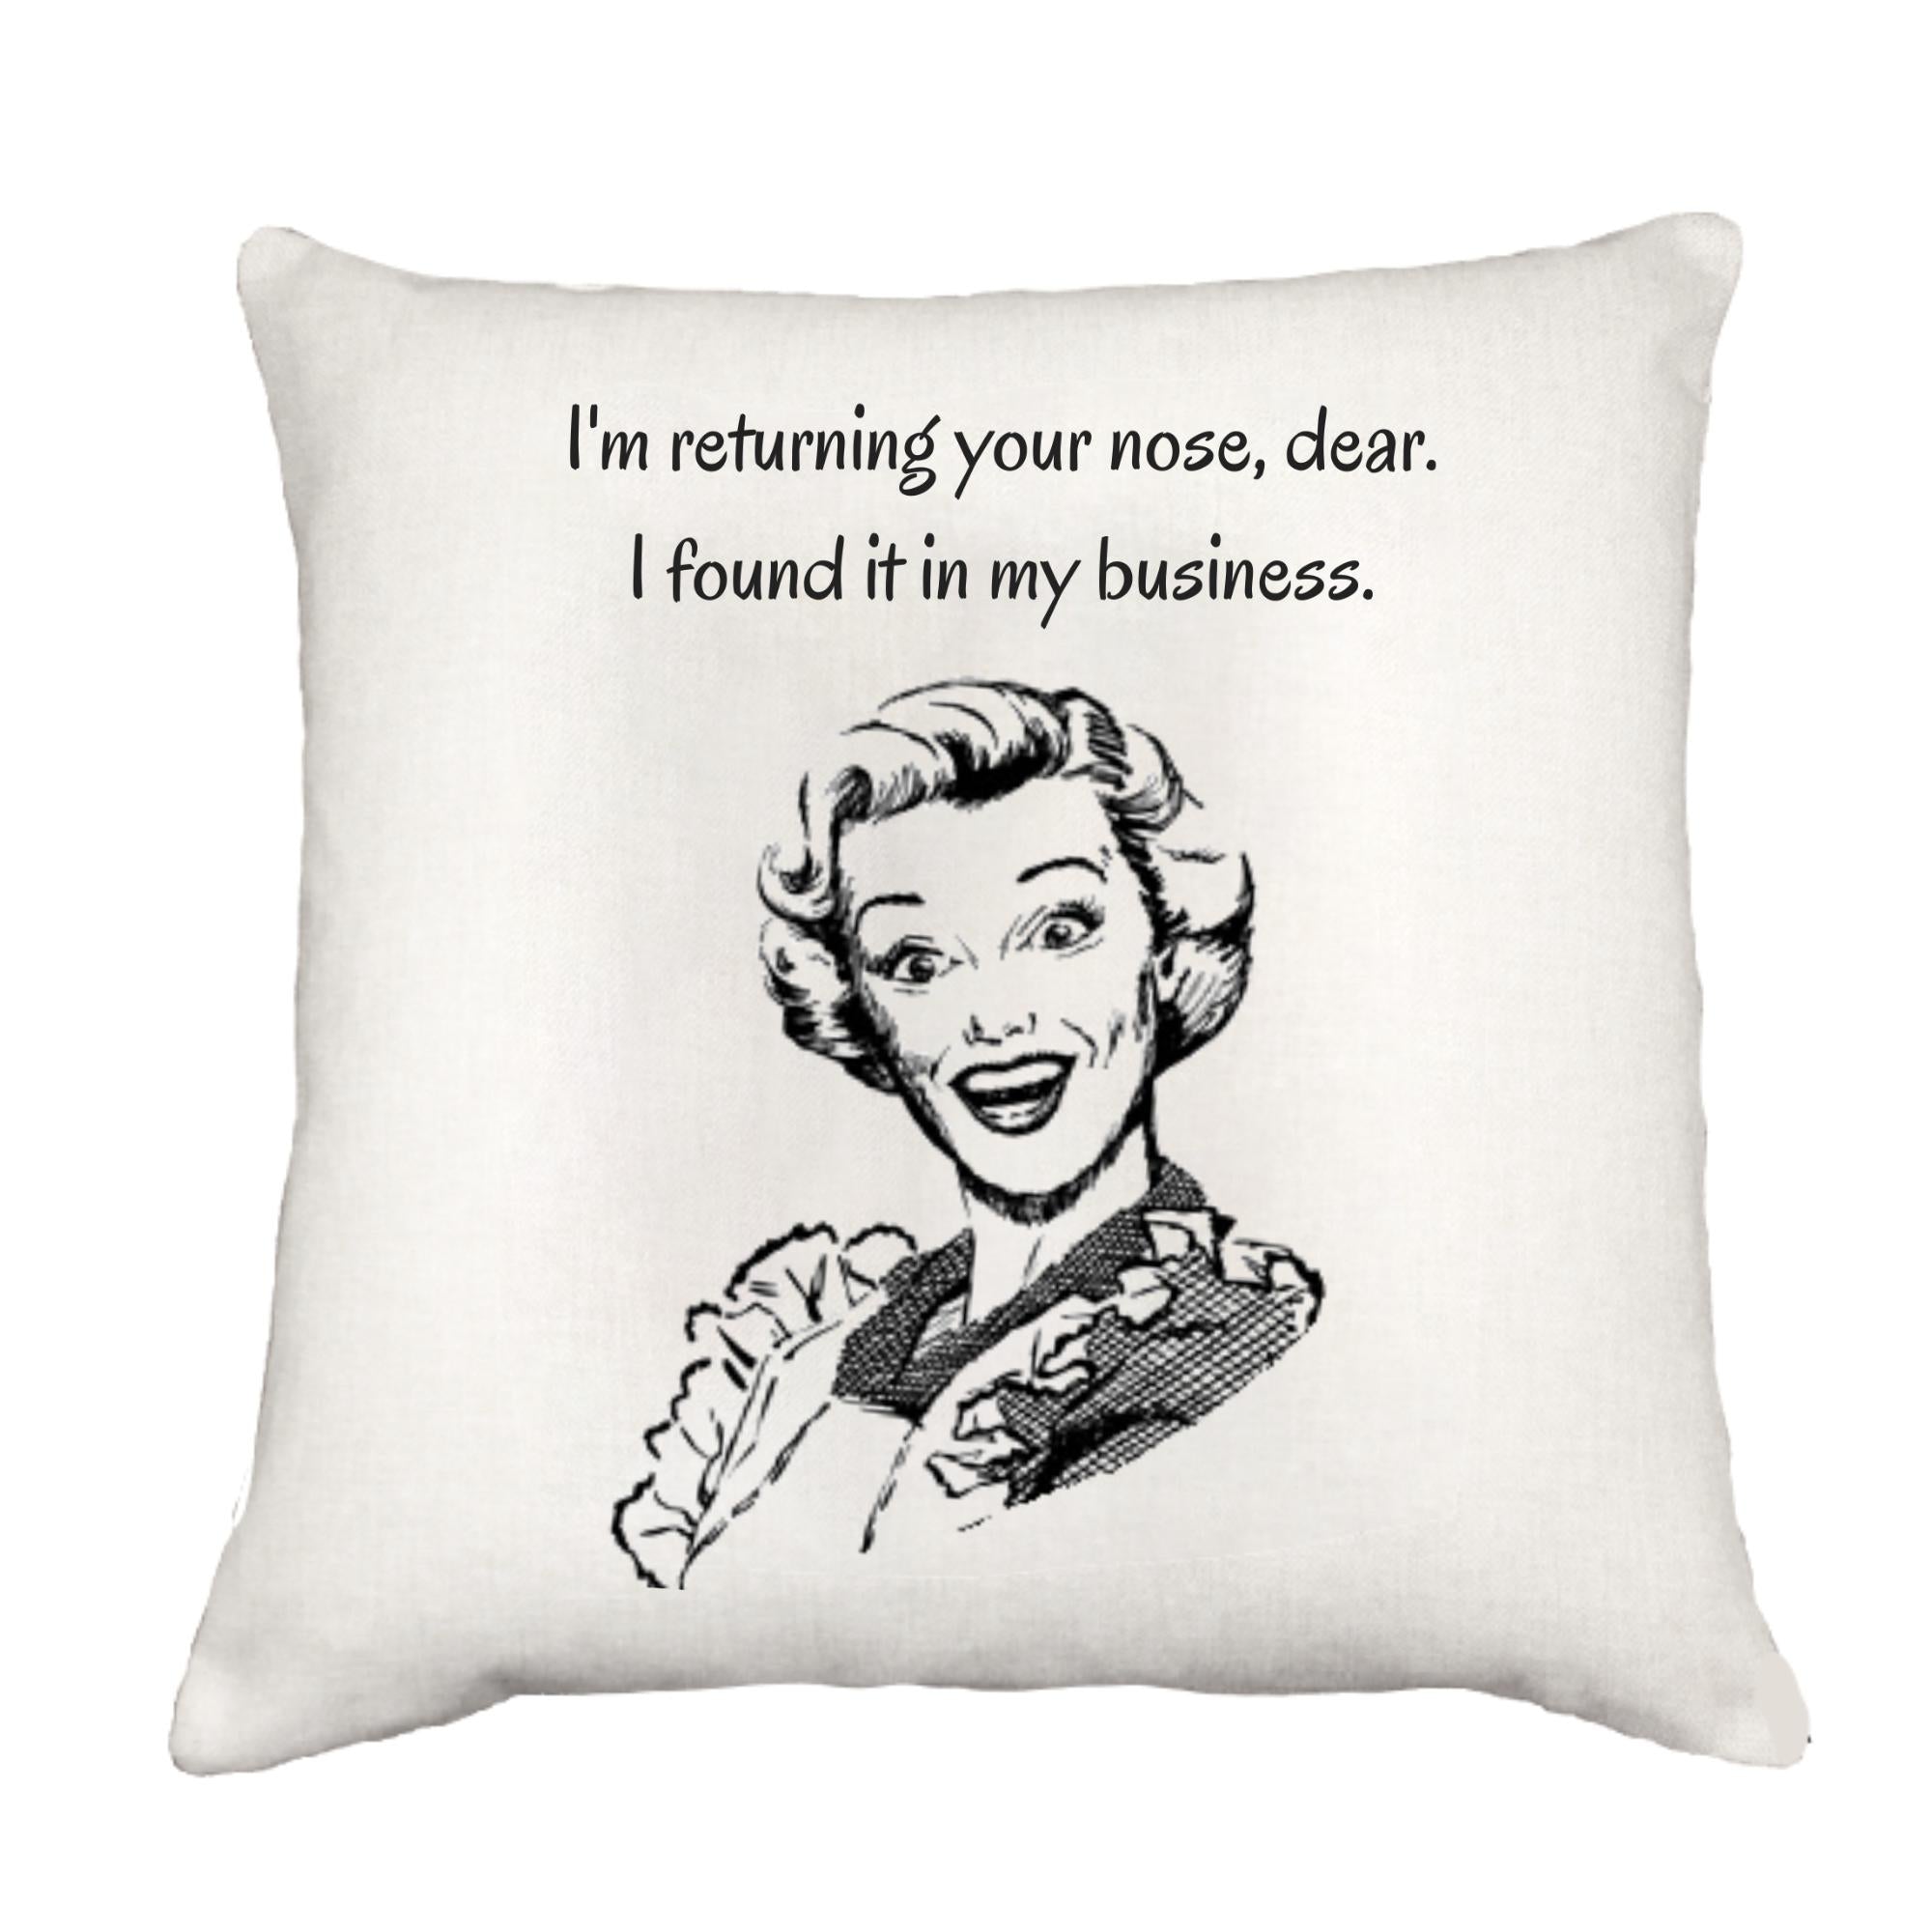 In My Business Cottage Pillow Throw/Decorative Pillow - Southern Sisters